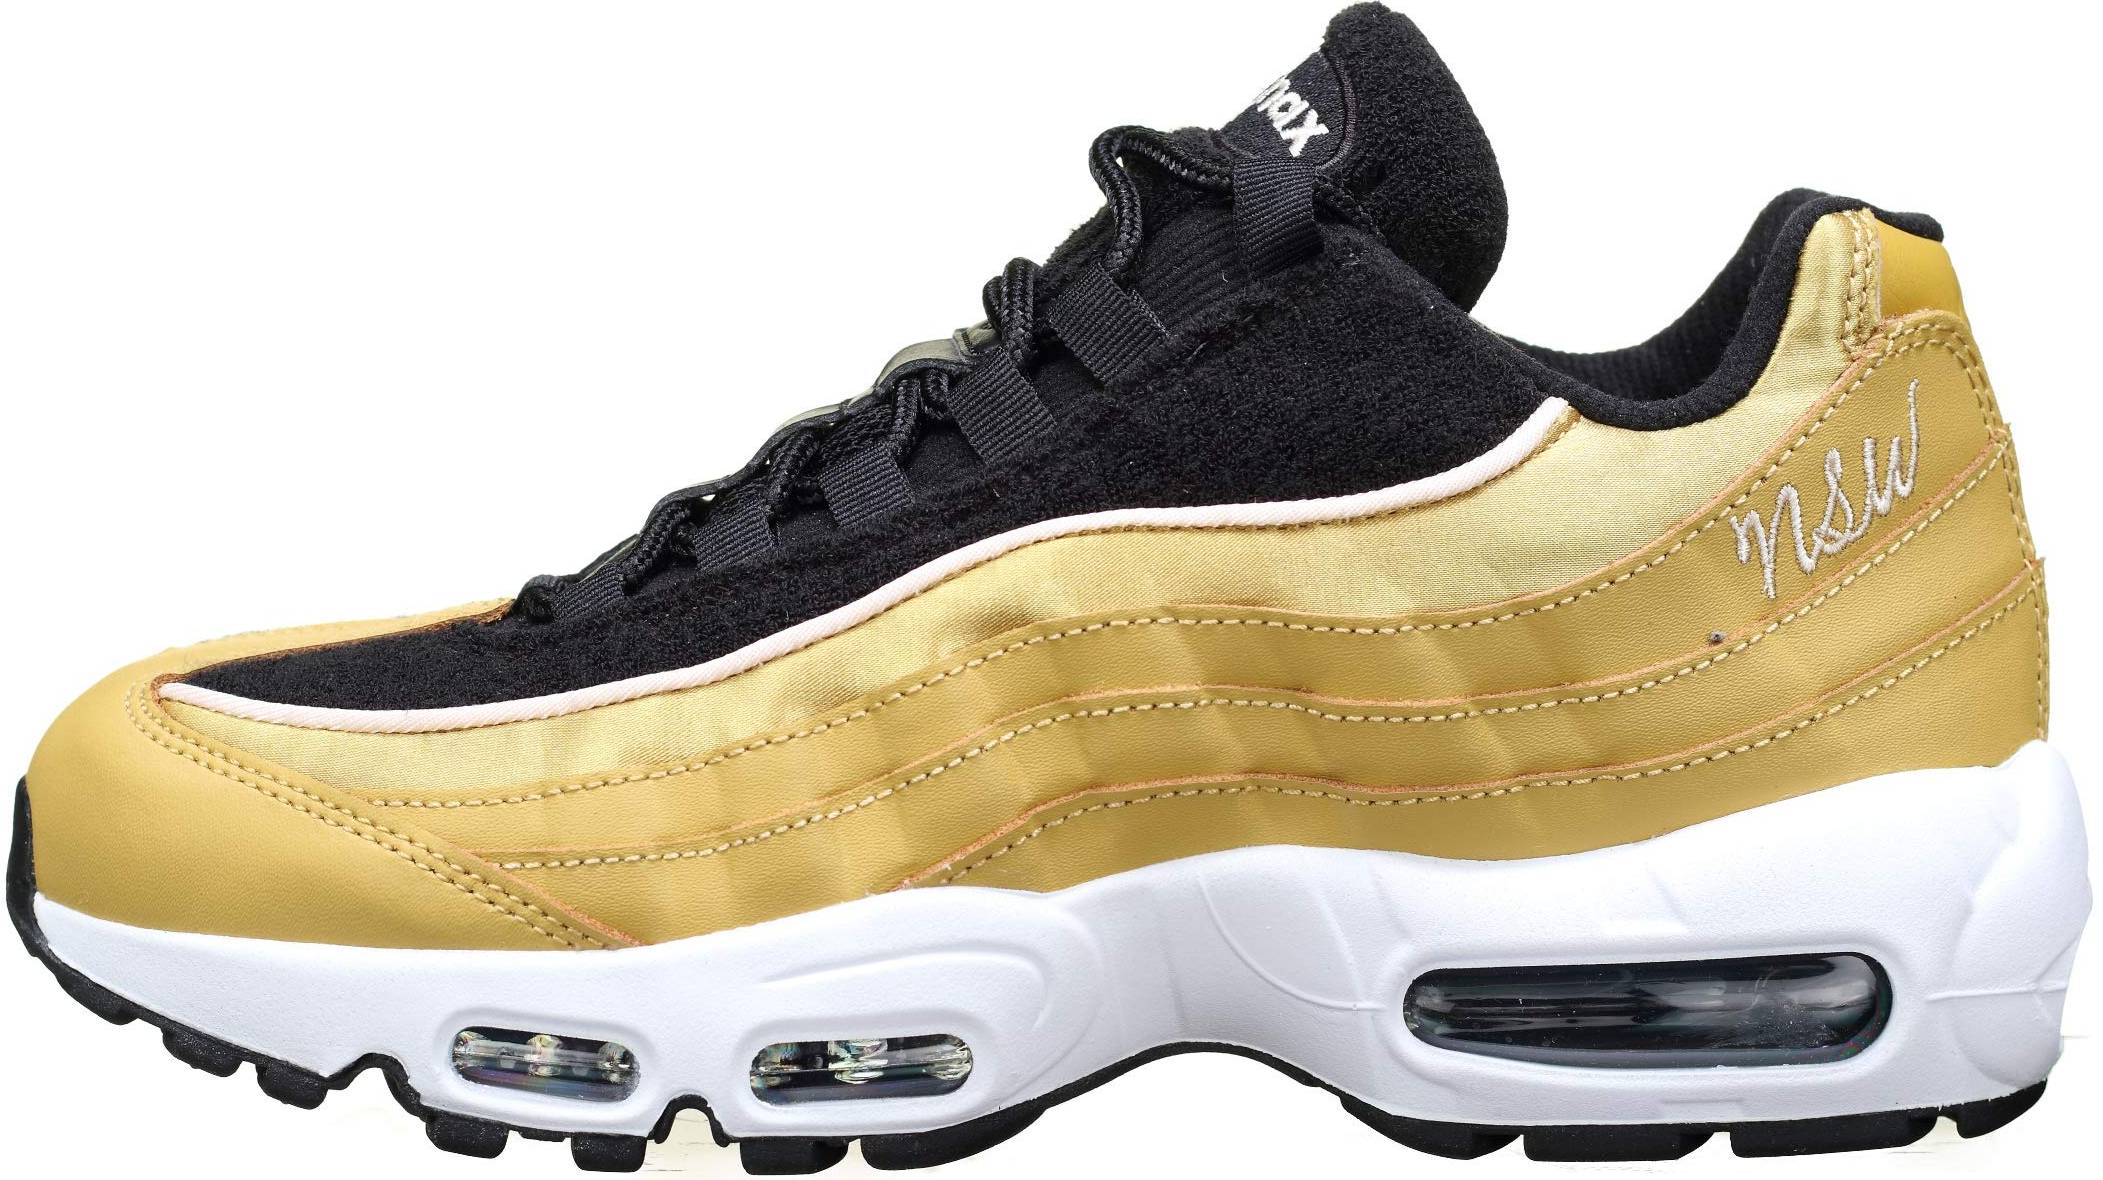 Nike Air Max 95 LX sneakers in 6 colors (only $99) | RunRepeat